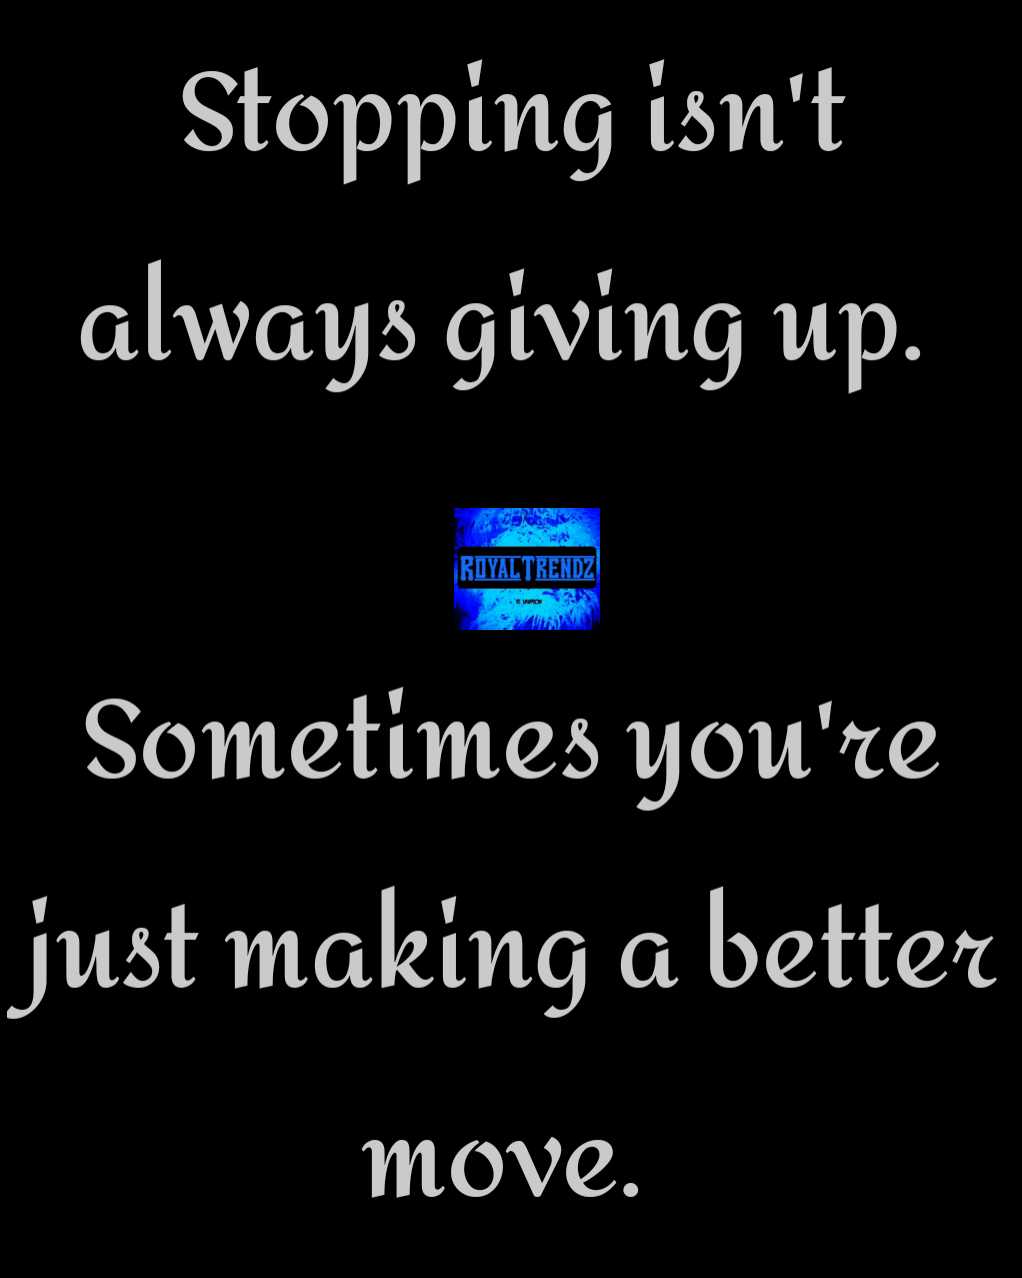 Stopping isn't always giving up. 

Sometimes you're just making a better move. 